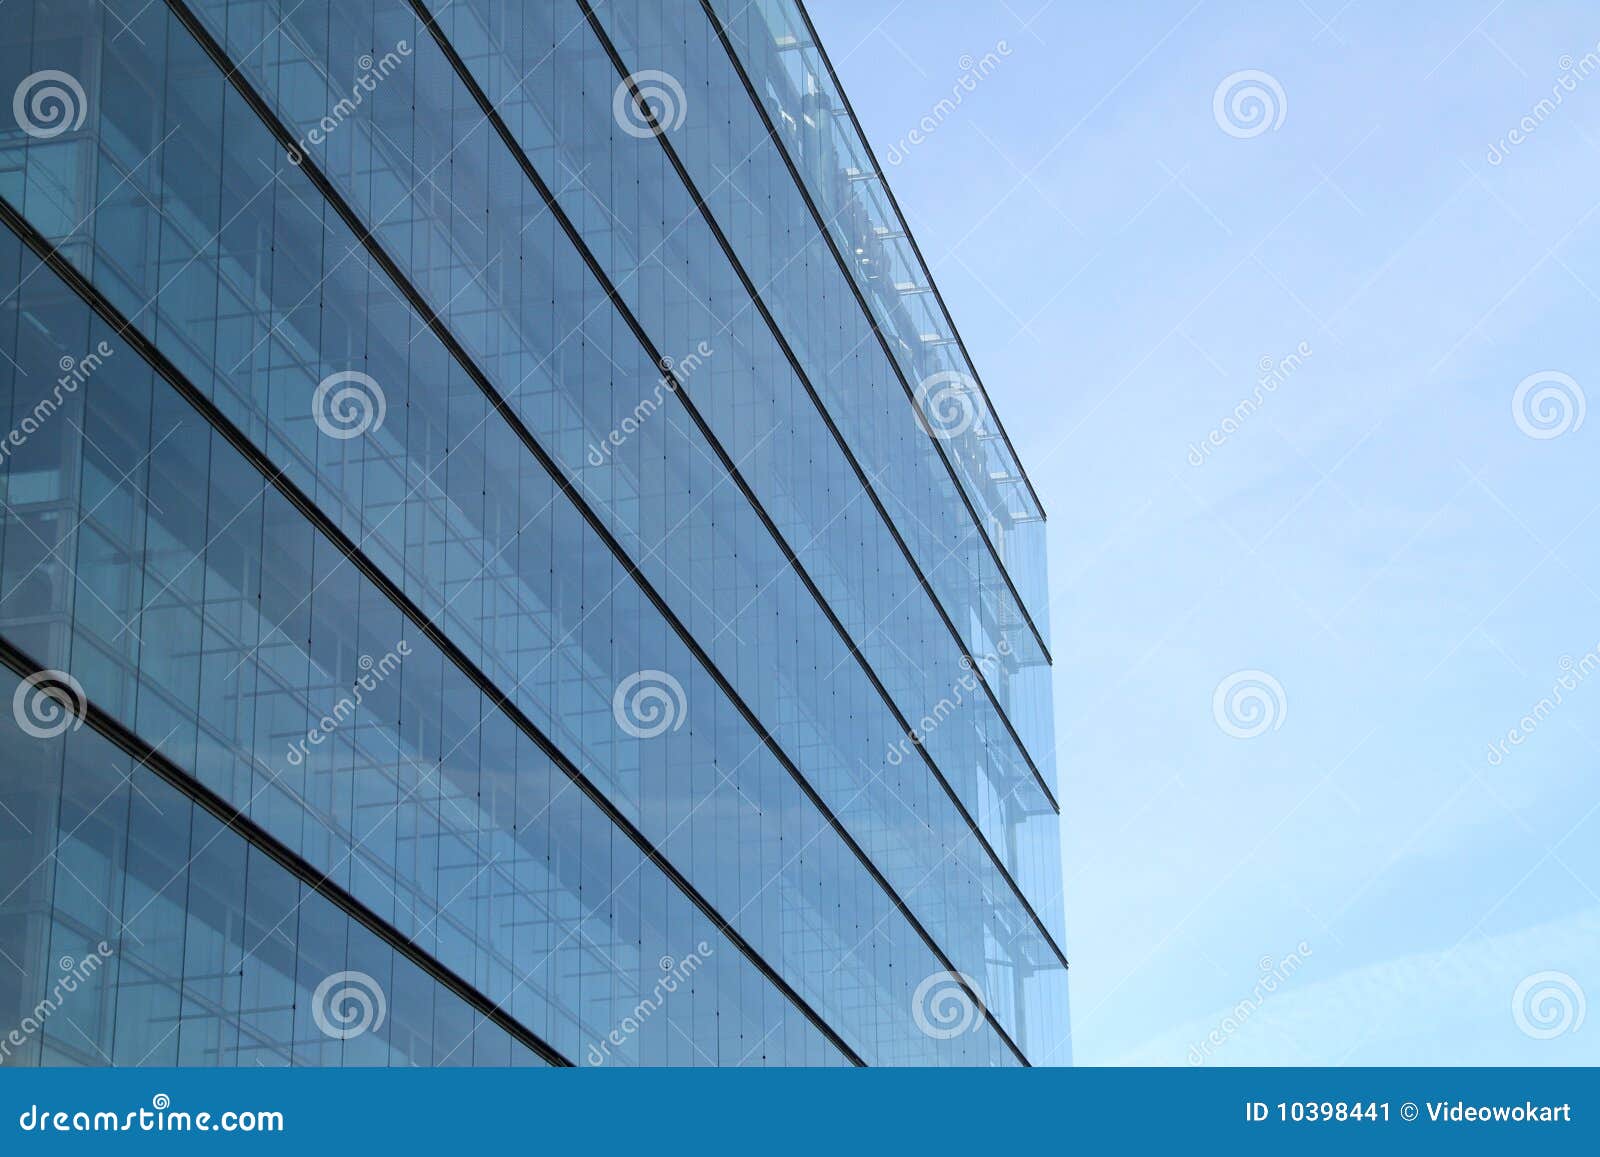 Modern glass building stock image. Image of architecture - 10398441